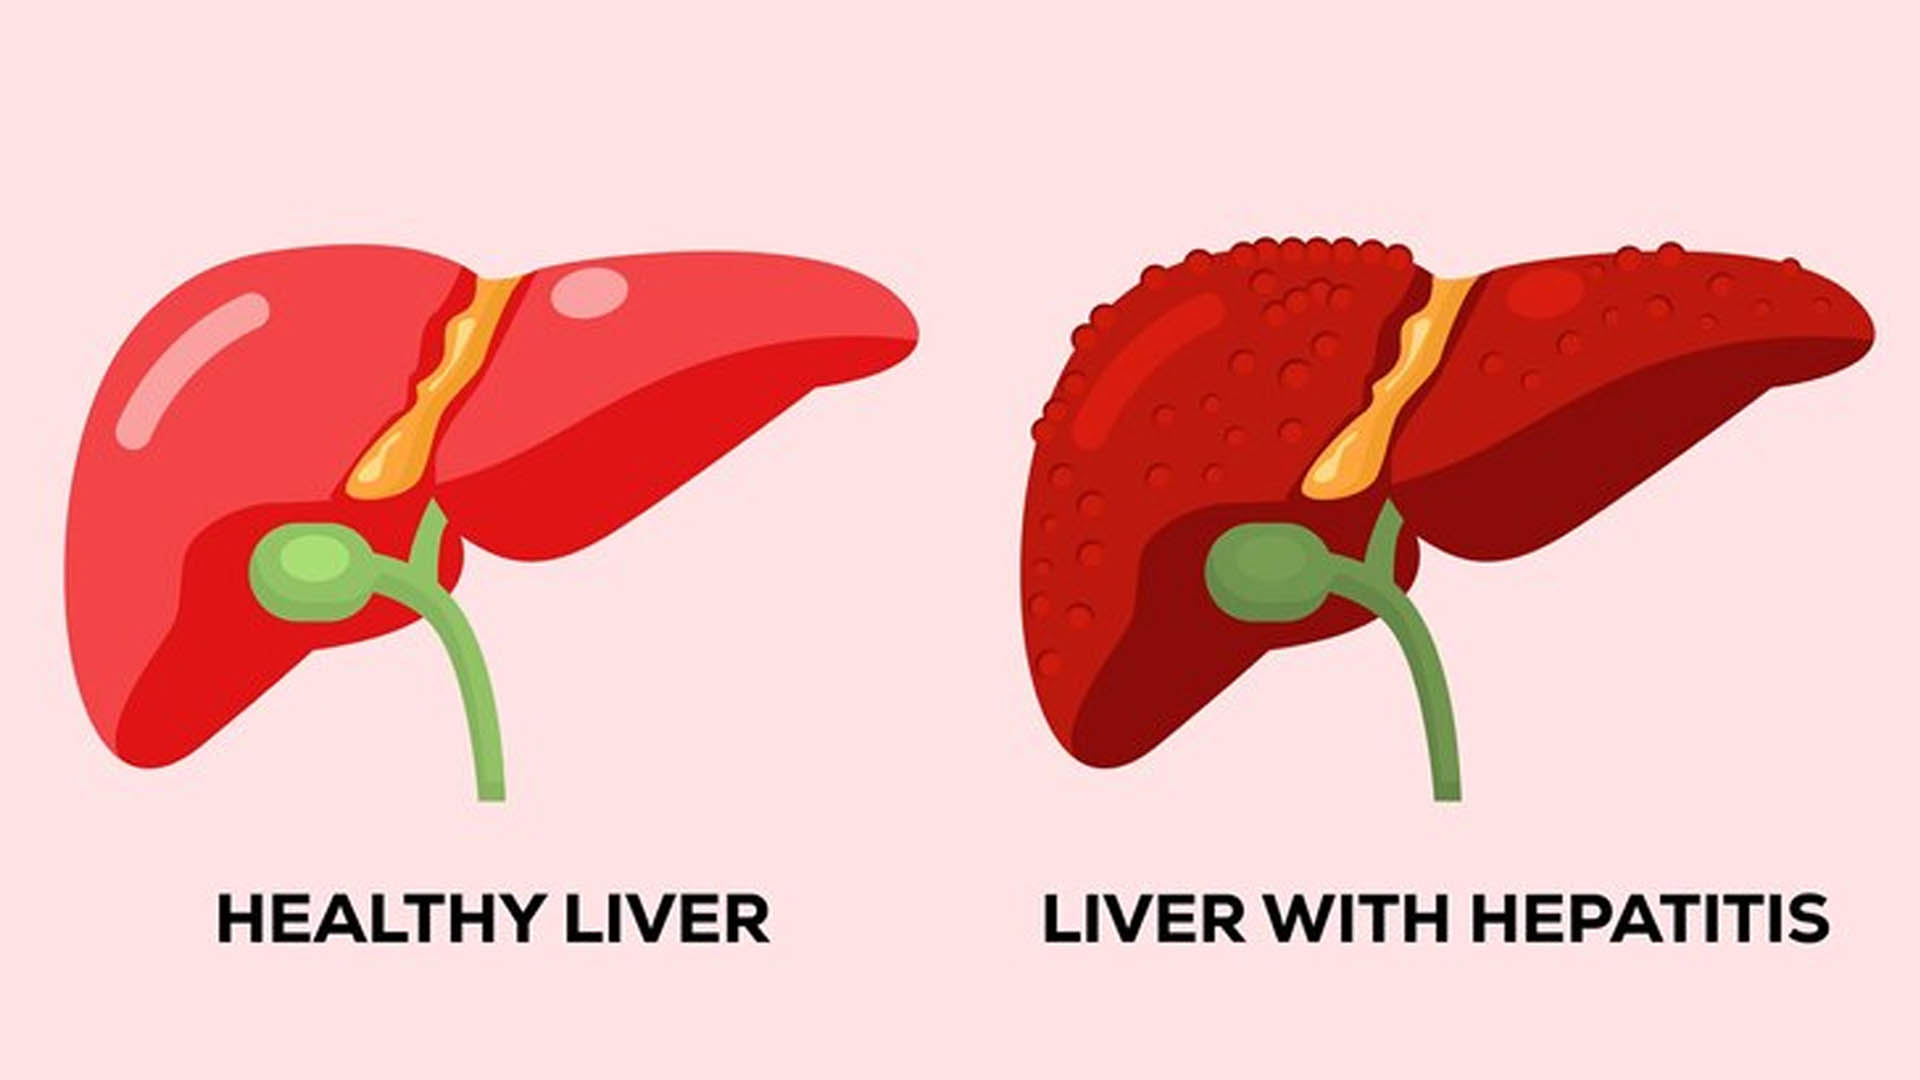 Liver Disease: Diagnosis, Treatment and Prevention